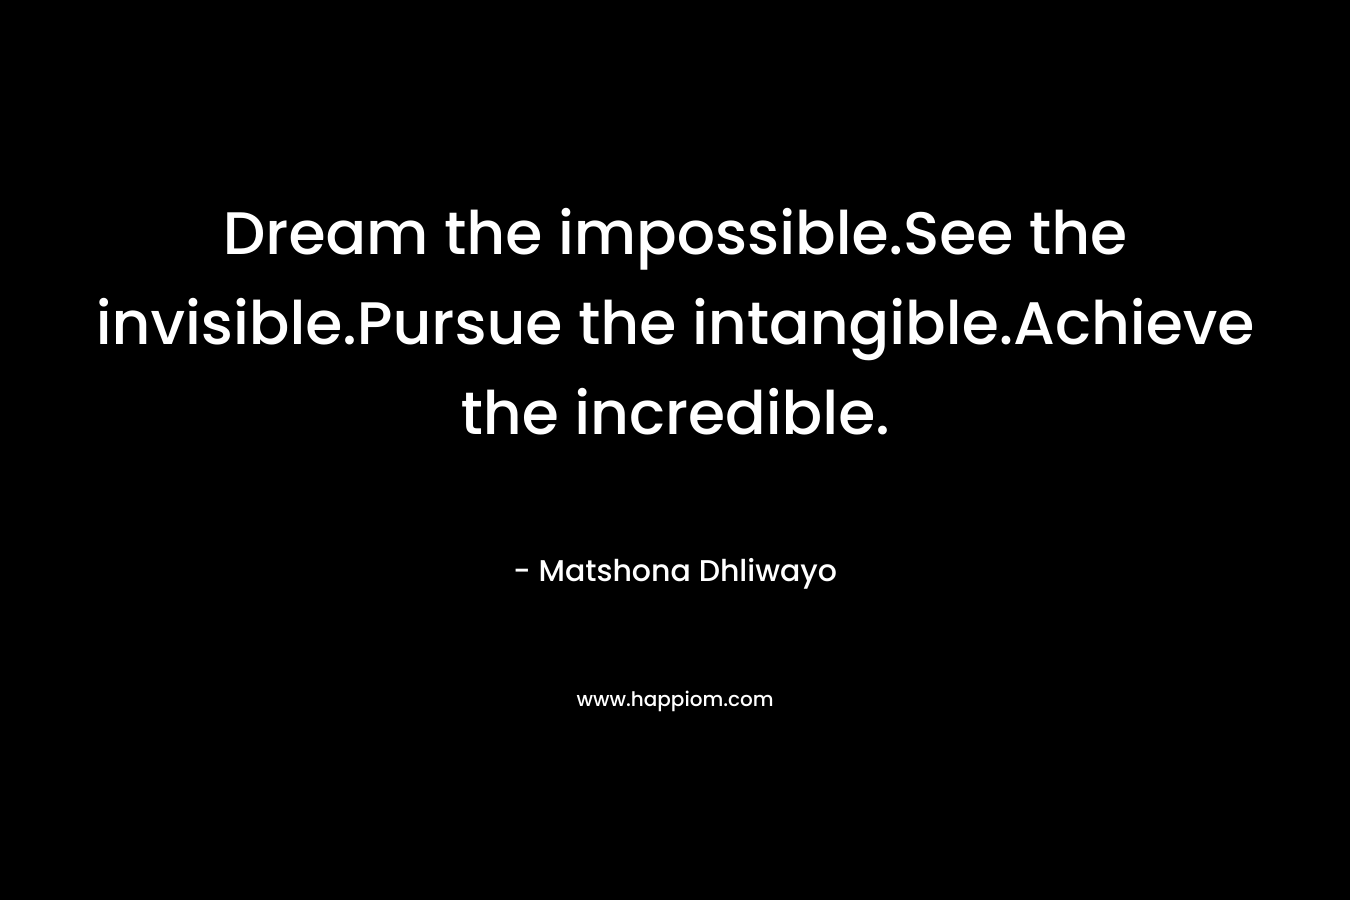 Dream the impossible.See the invisible.Pursue the intangible.Achieve the incredible.